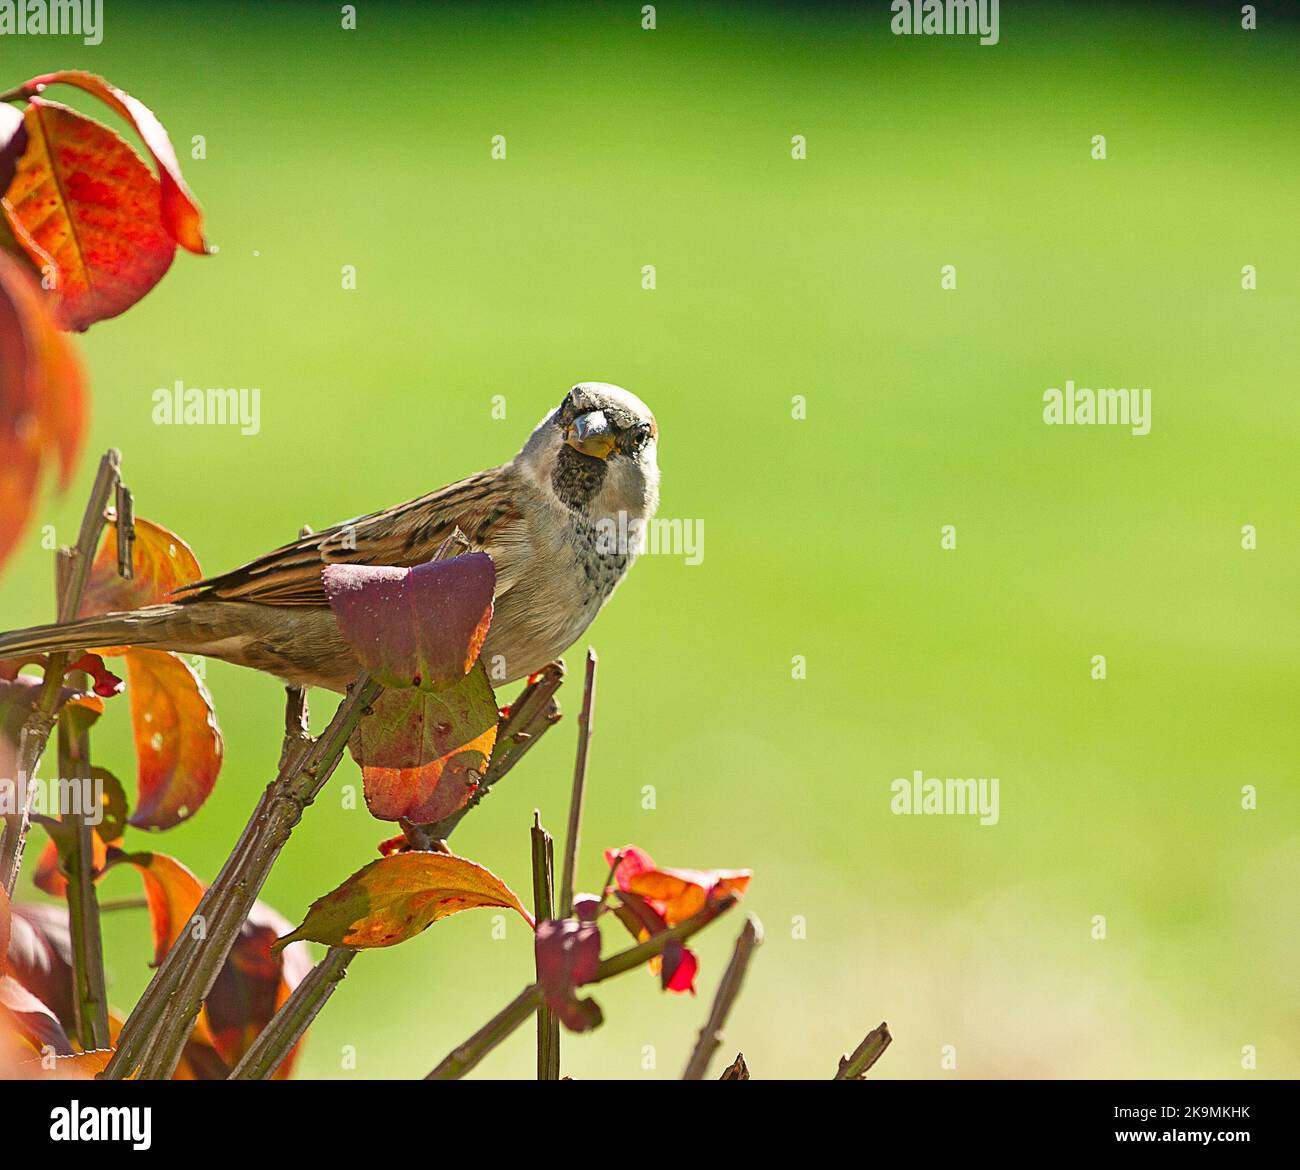 Sparrows being watchful or feeding at birdfeeder on fall day Stock Photo